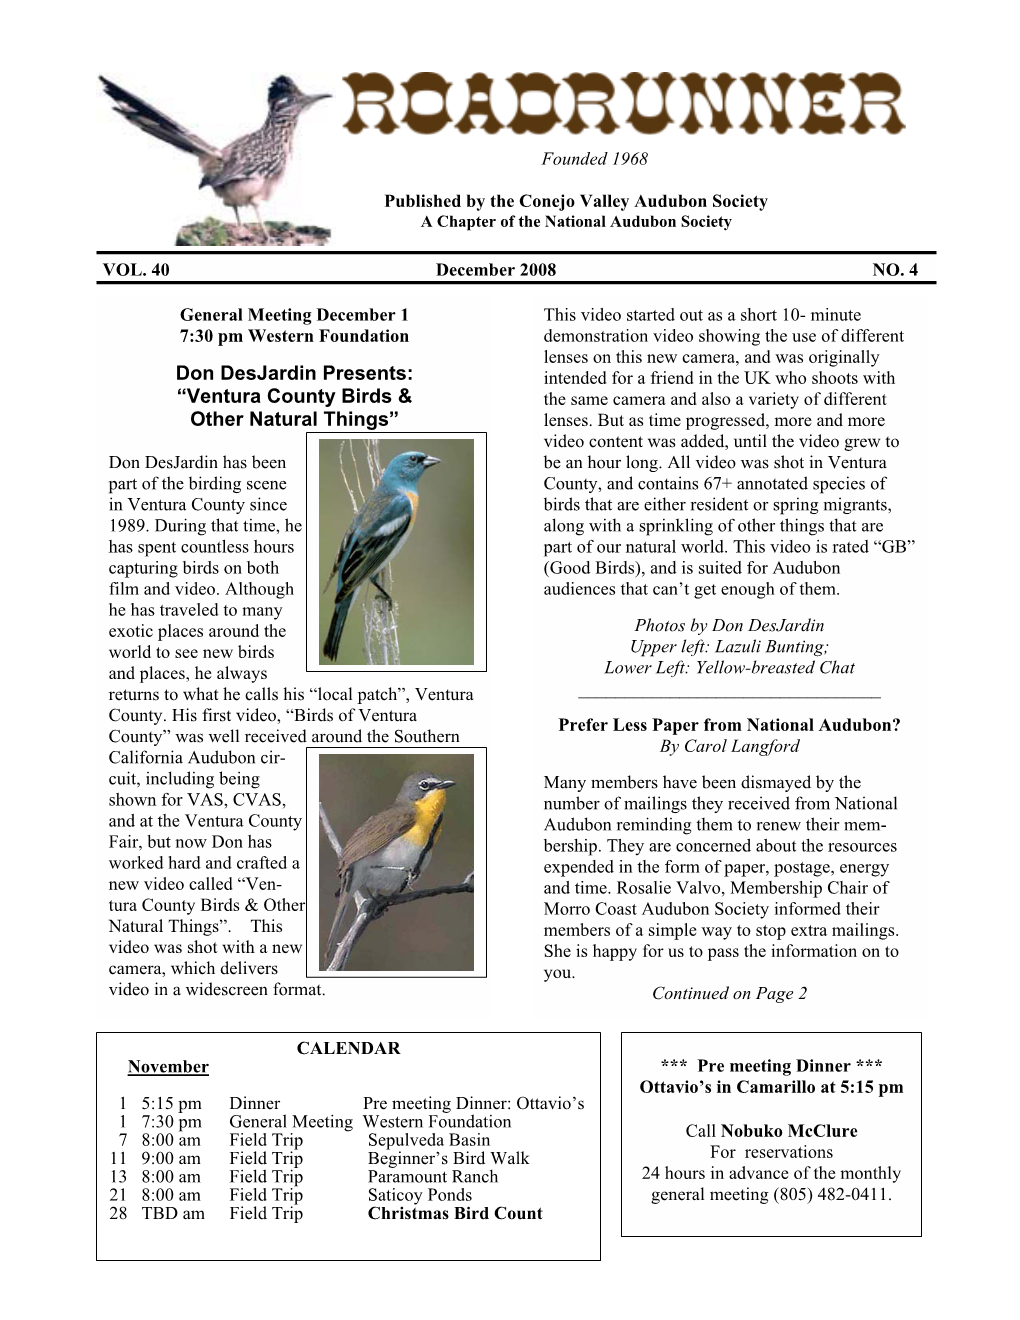 Don Desjardin Presents: “Ventura County Birds & Other Natural Things”